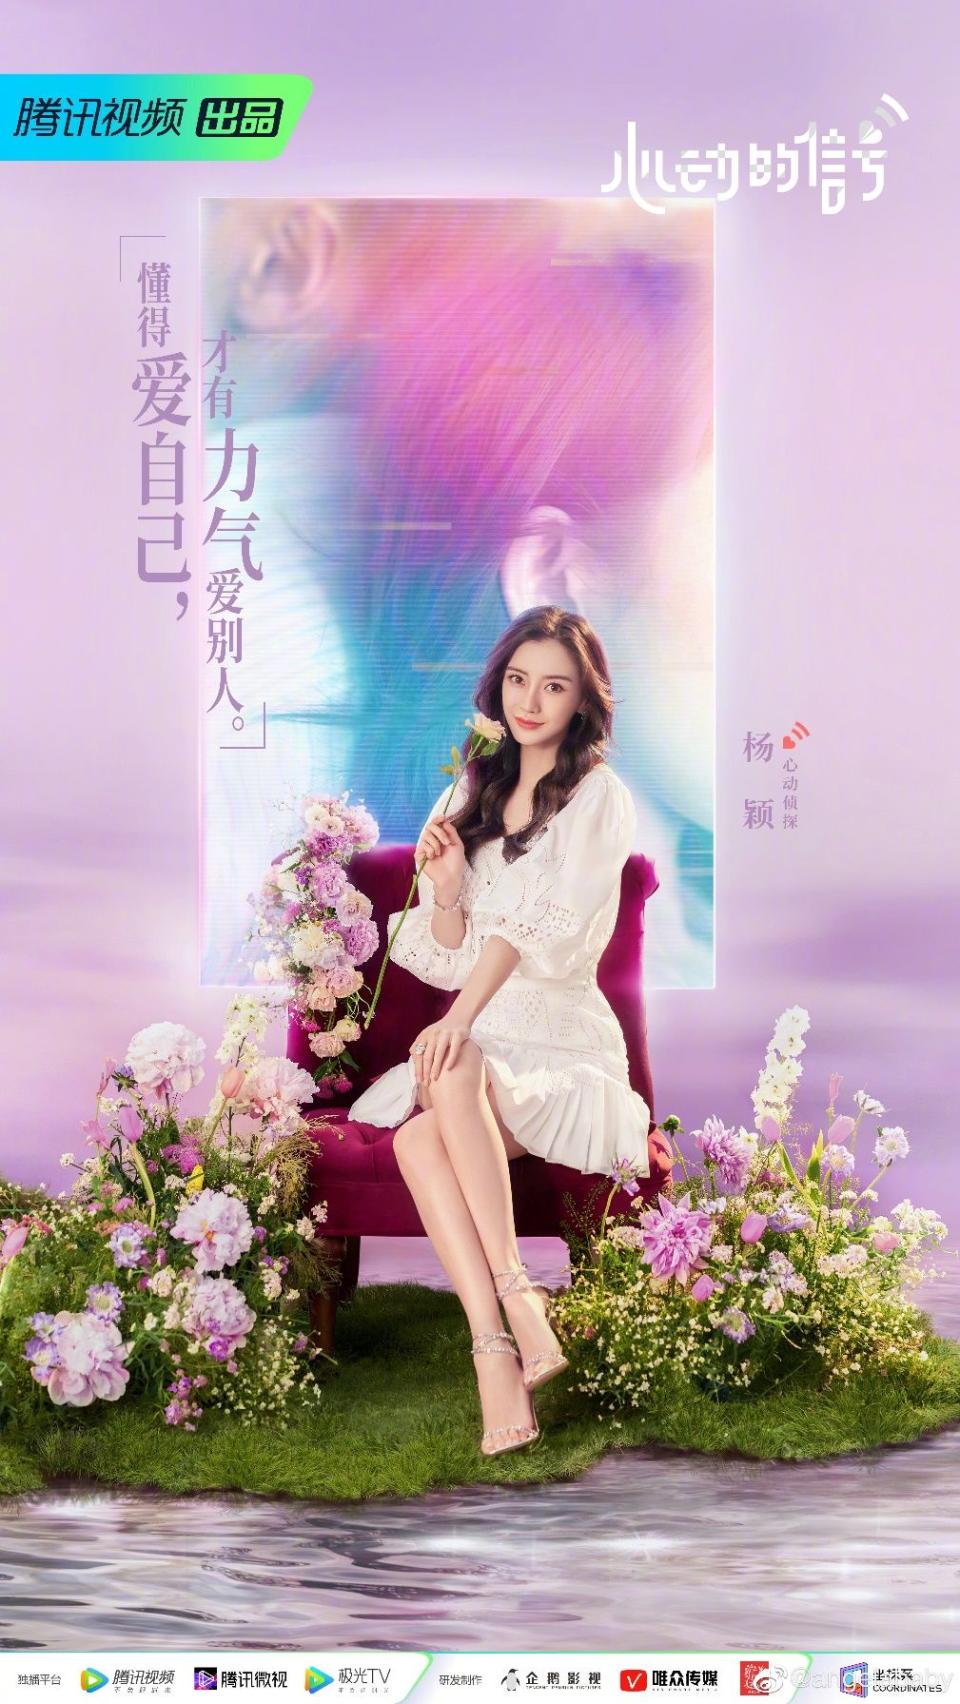 Angelababy's official announcement poster for Signal of Heart 4. 